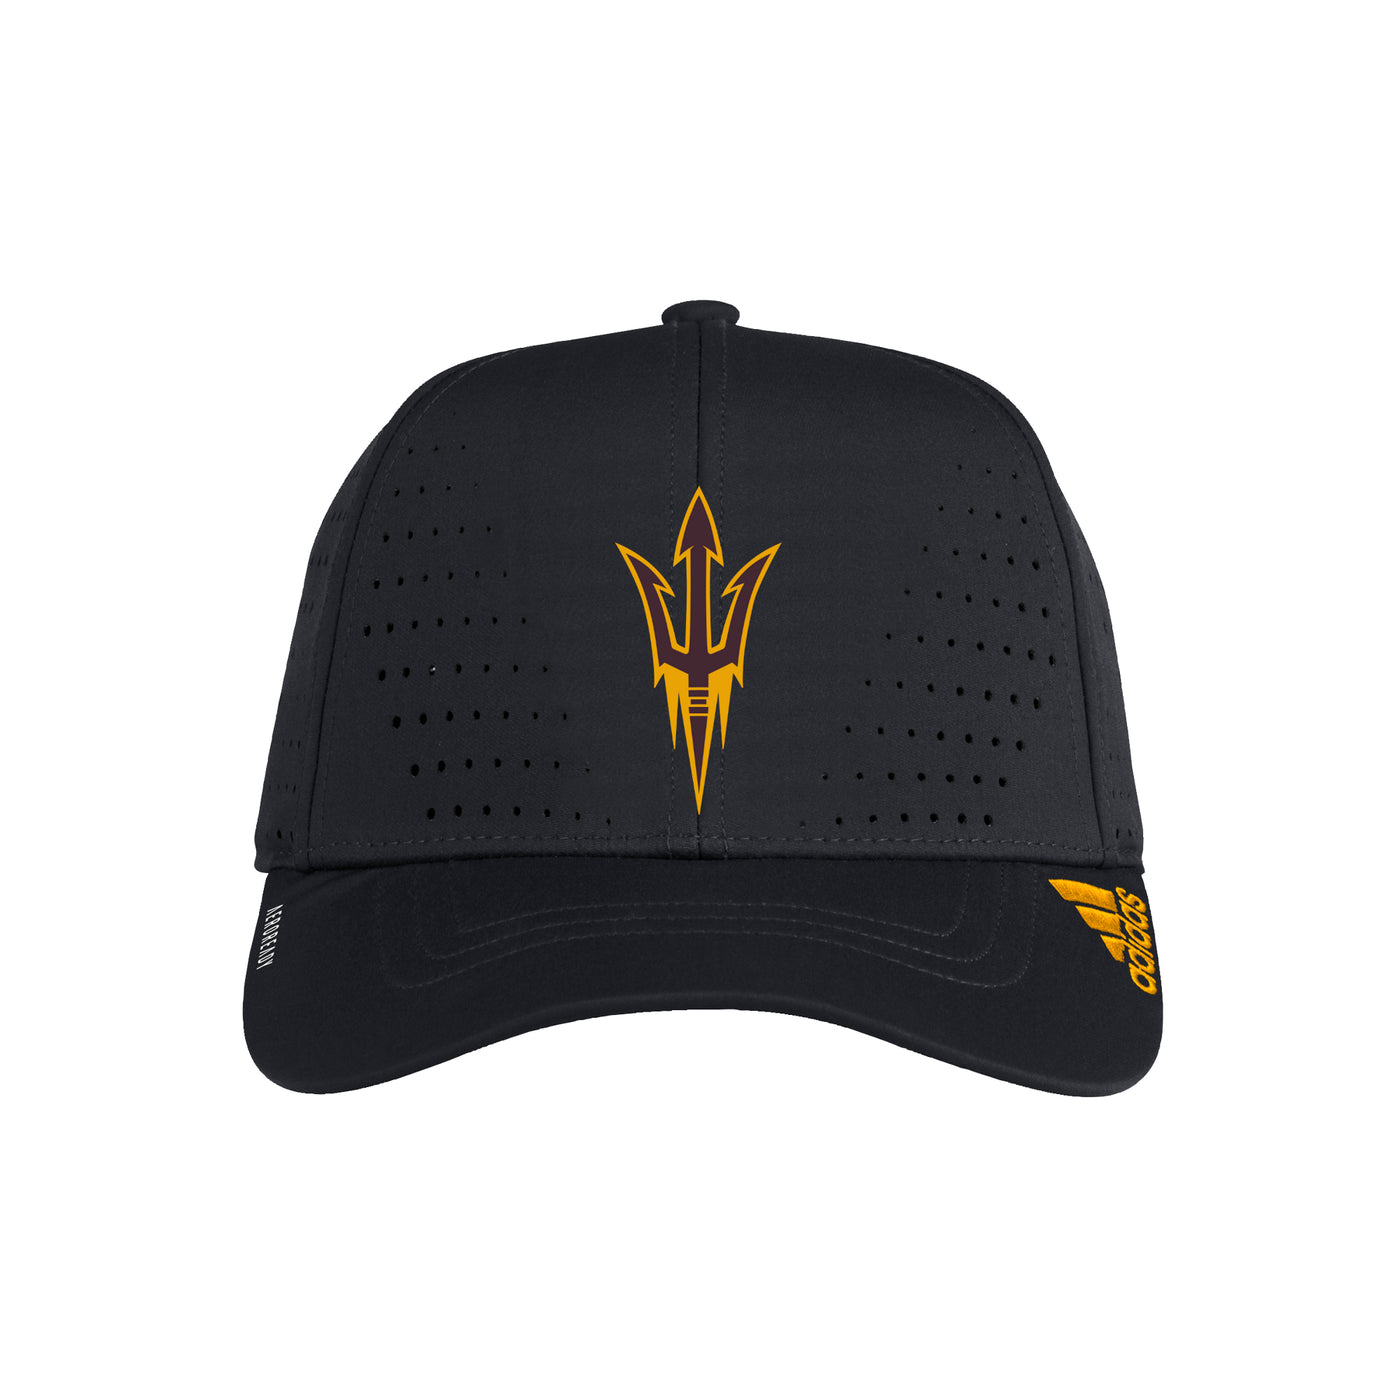 ASU black Adidas hat with pitchfork on the front and breathable holes in fabric